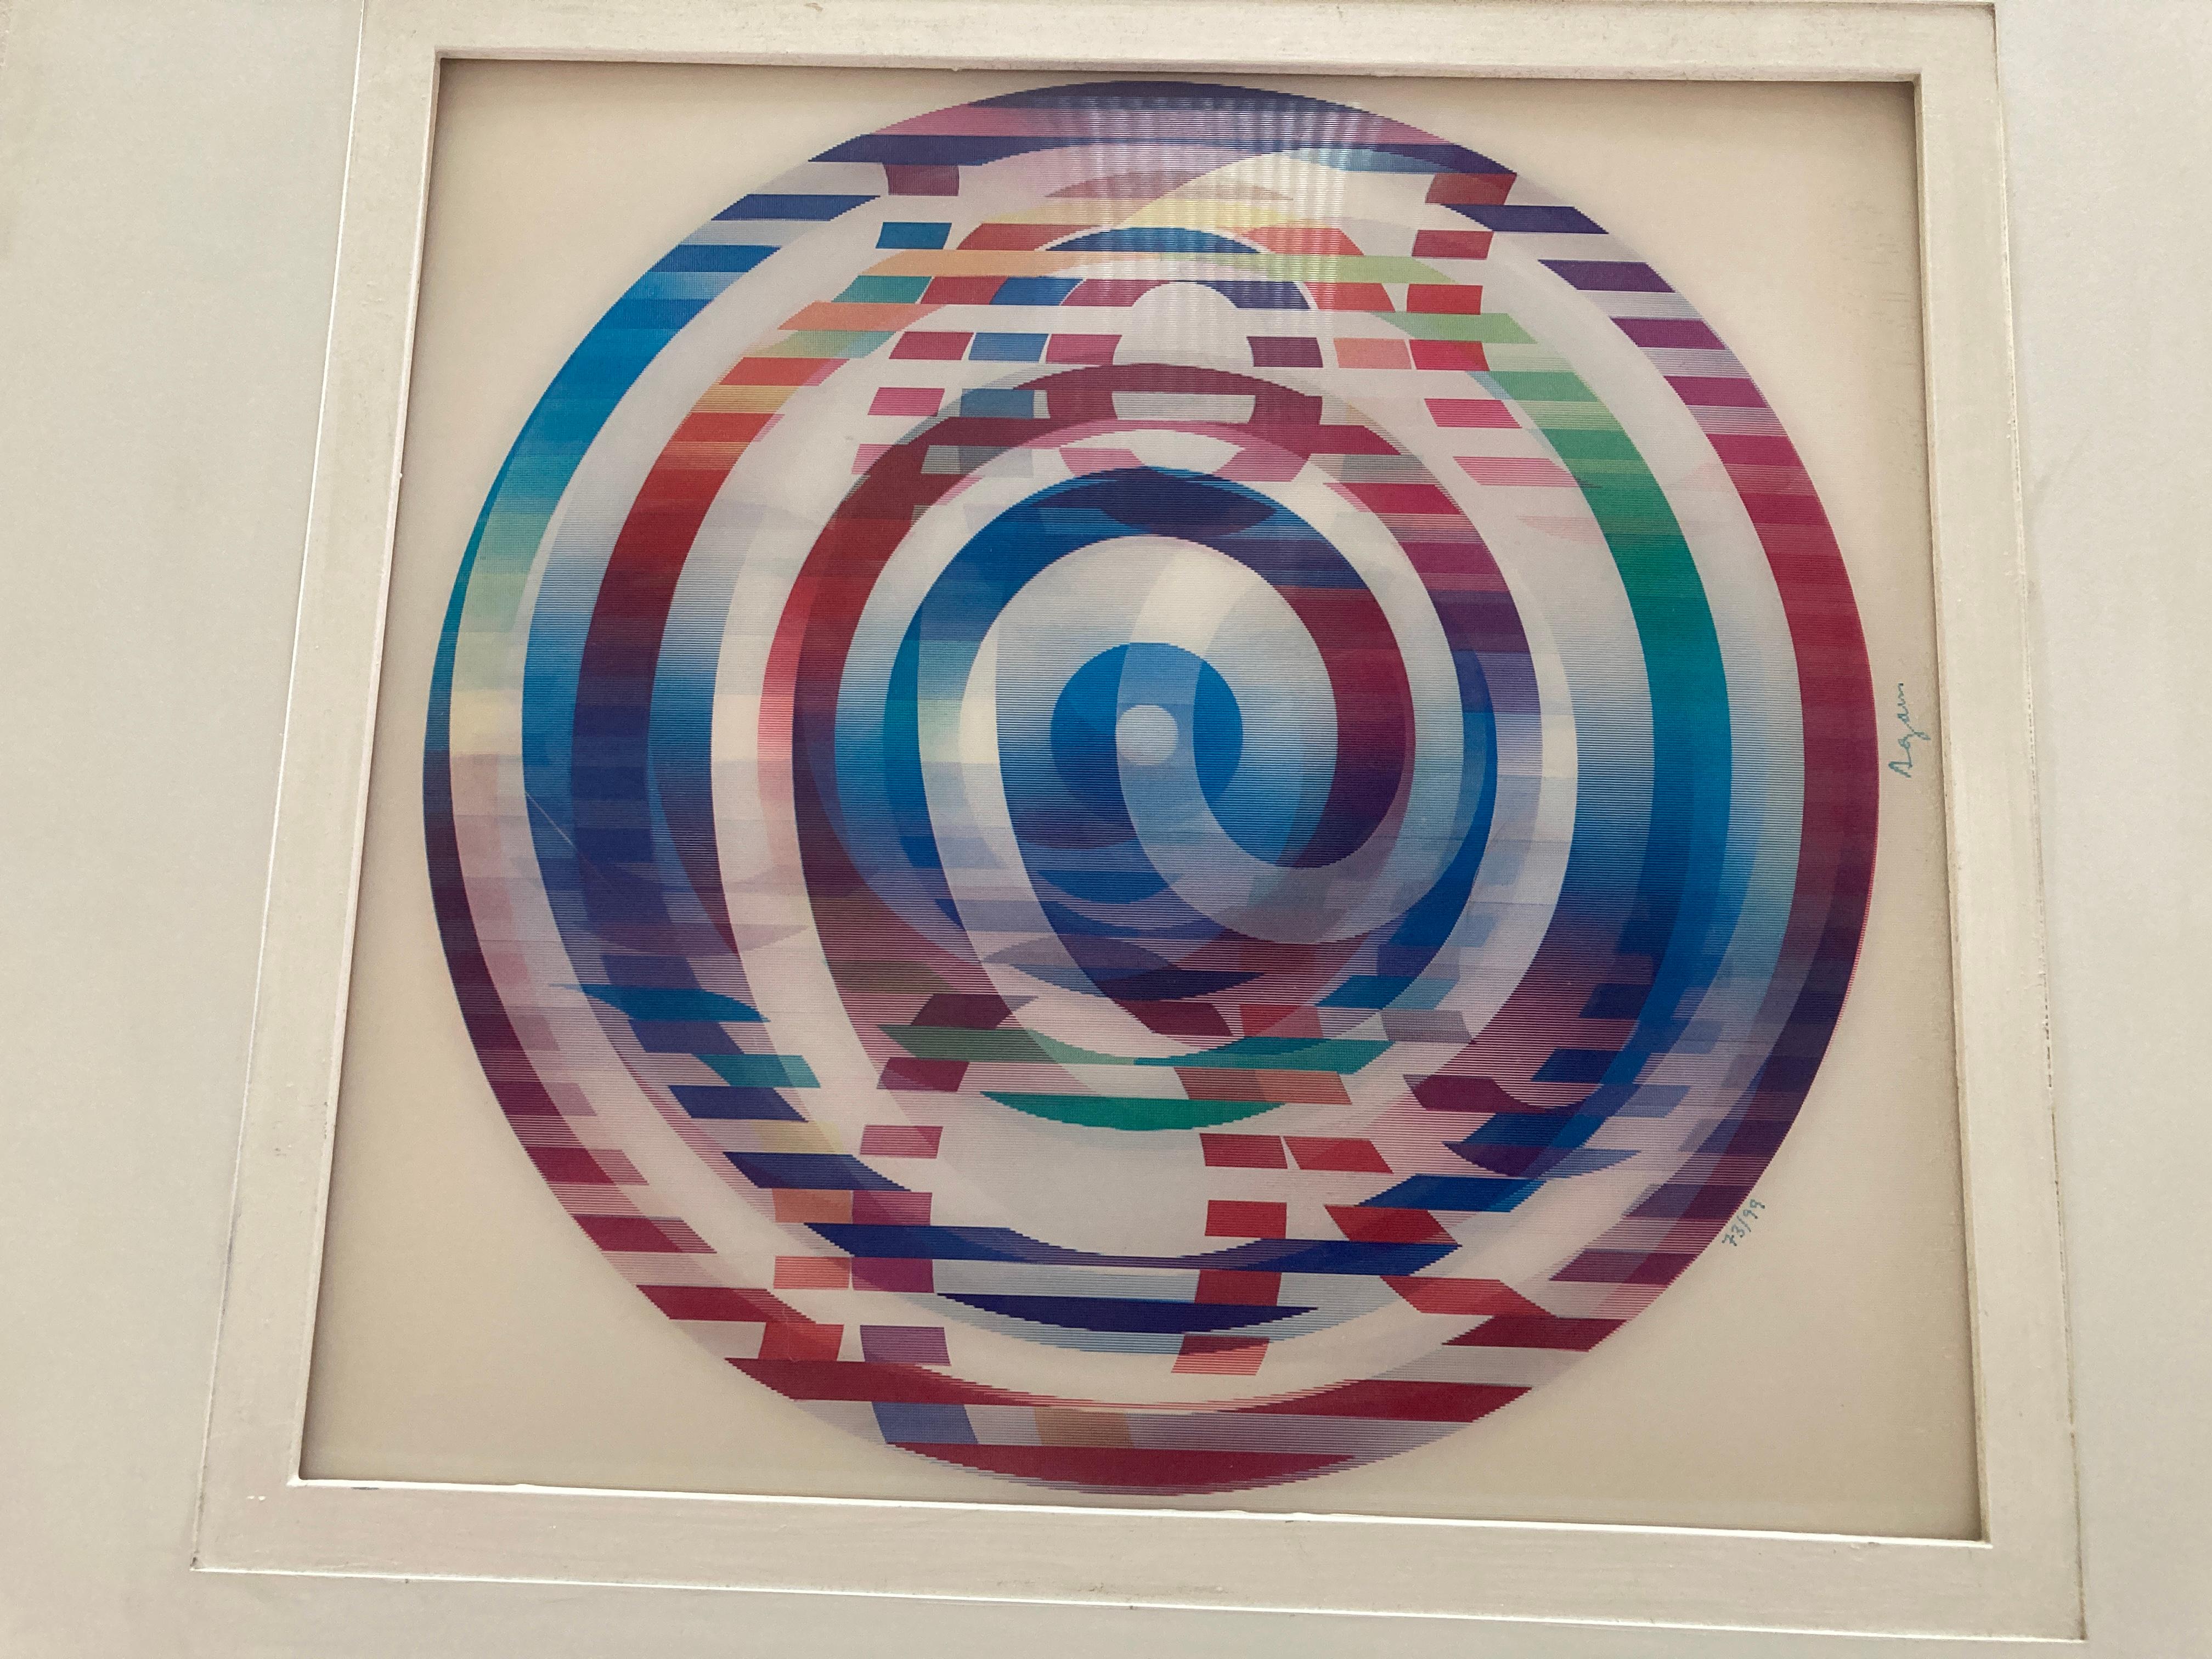 Yaacov Agam 'Image of the World' Signed, Limited Edition Lenticular Agamograph 5